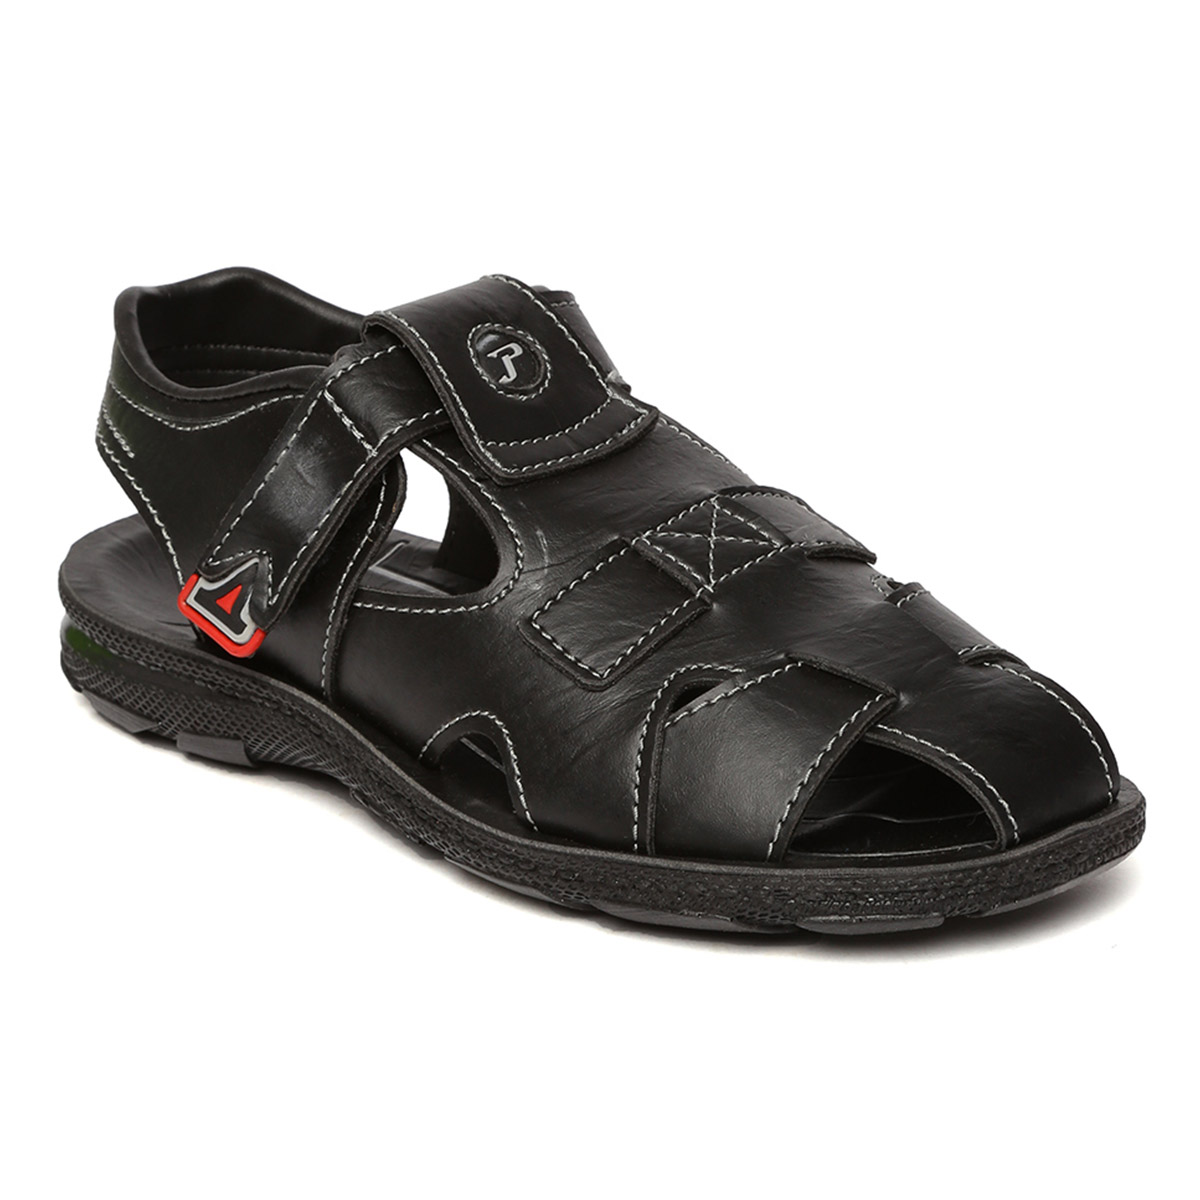 Buy Paragon-Paragon Max Men's Black Slippers Online @ ₹599 from ShopClues